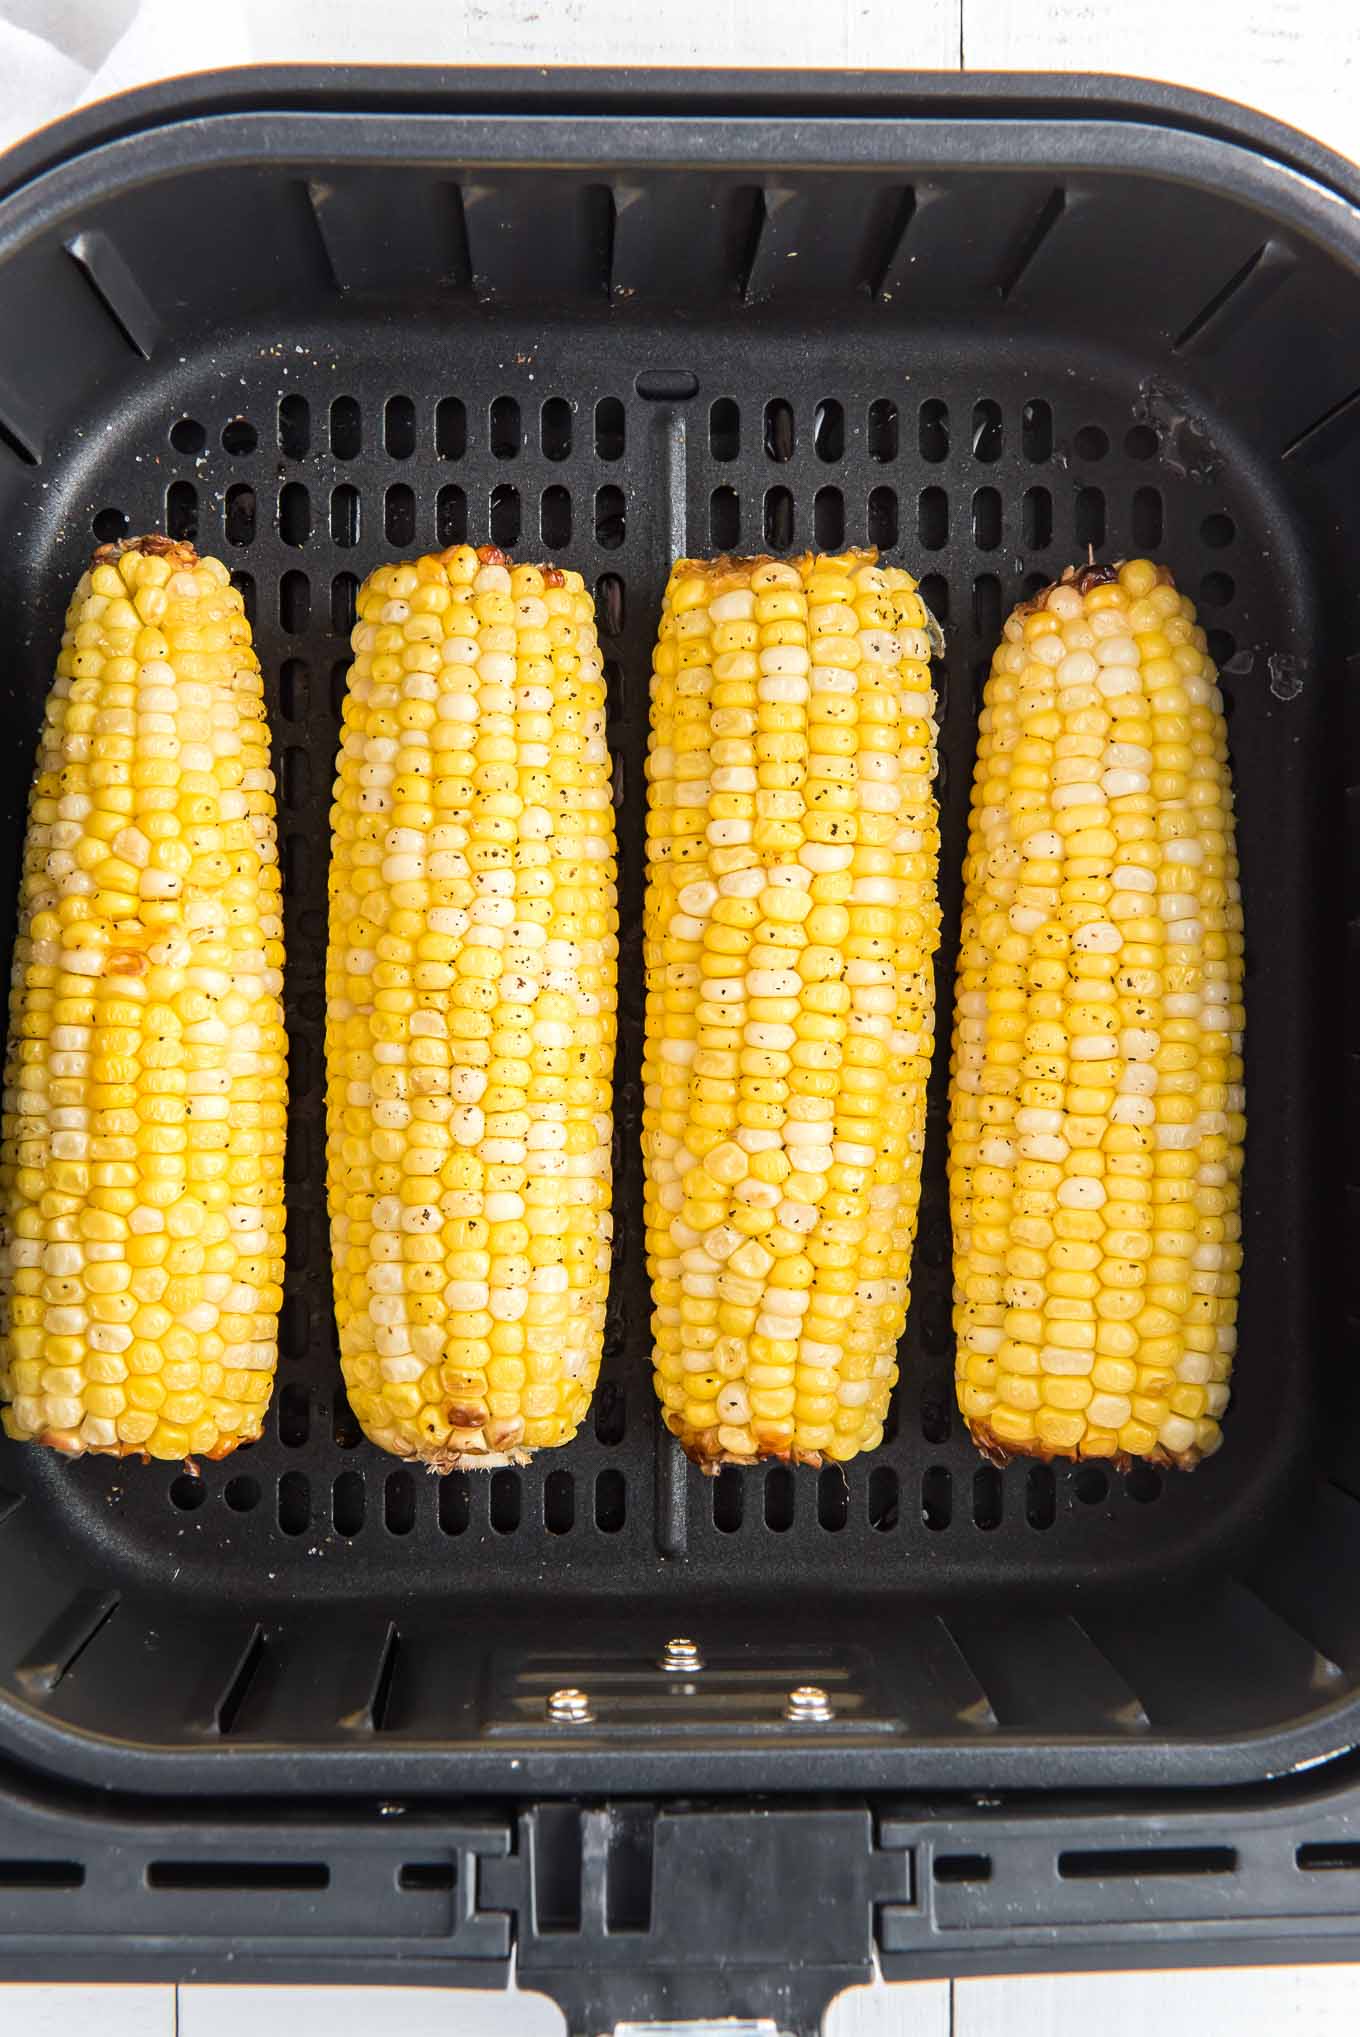 Air fryer corn on the cob in the air fryer basket.